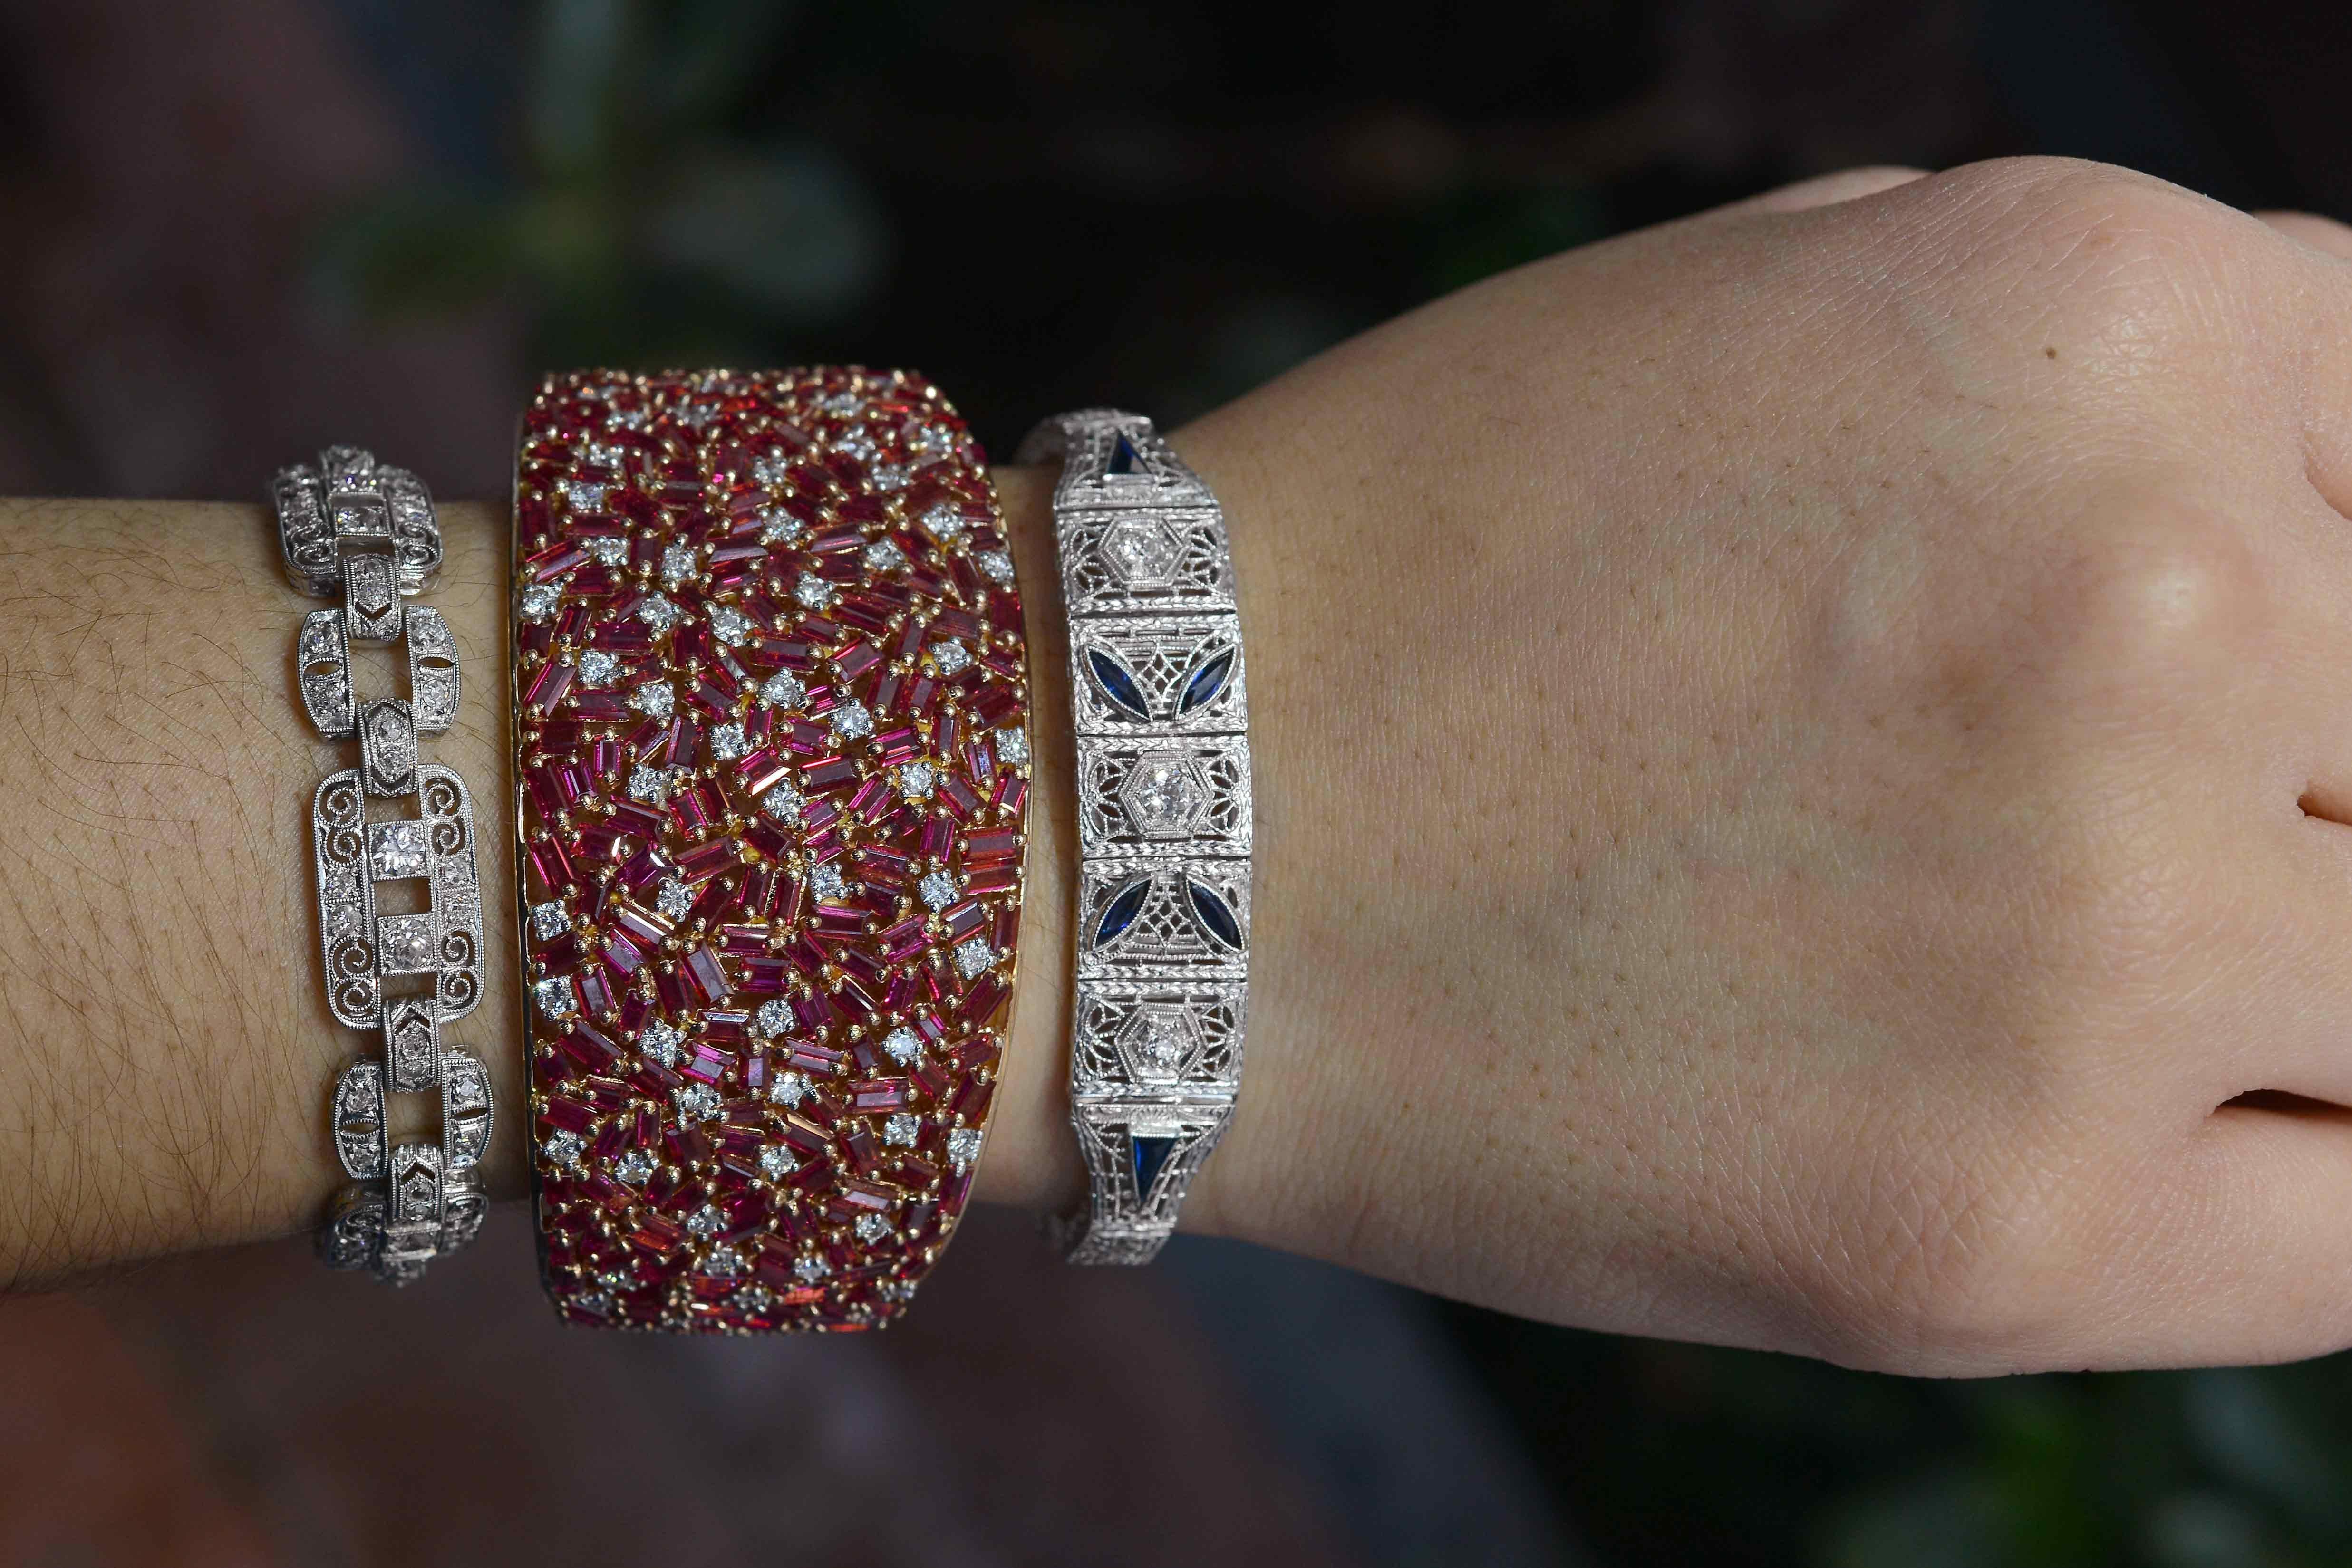 A most exciting Natural Burmese Ruby and diamond cuff bangle bracelet. The rich, vibrant Burma rubies glow with a rich, lustrous red and are certified as natural, unheated with a laboratory report. Talk about a statement piece! At over 2 1/2